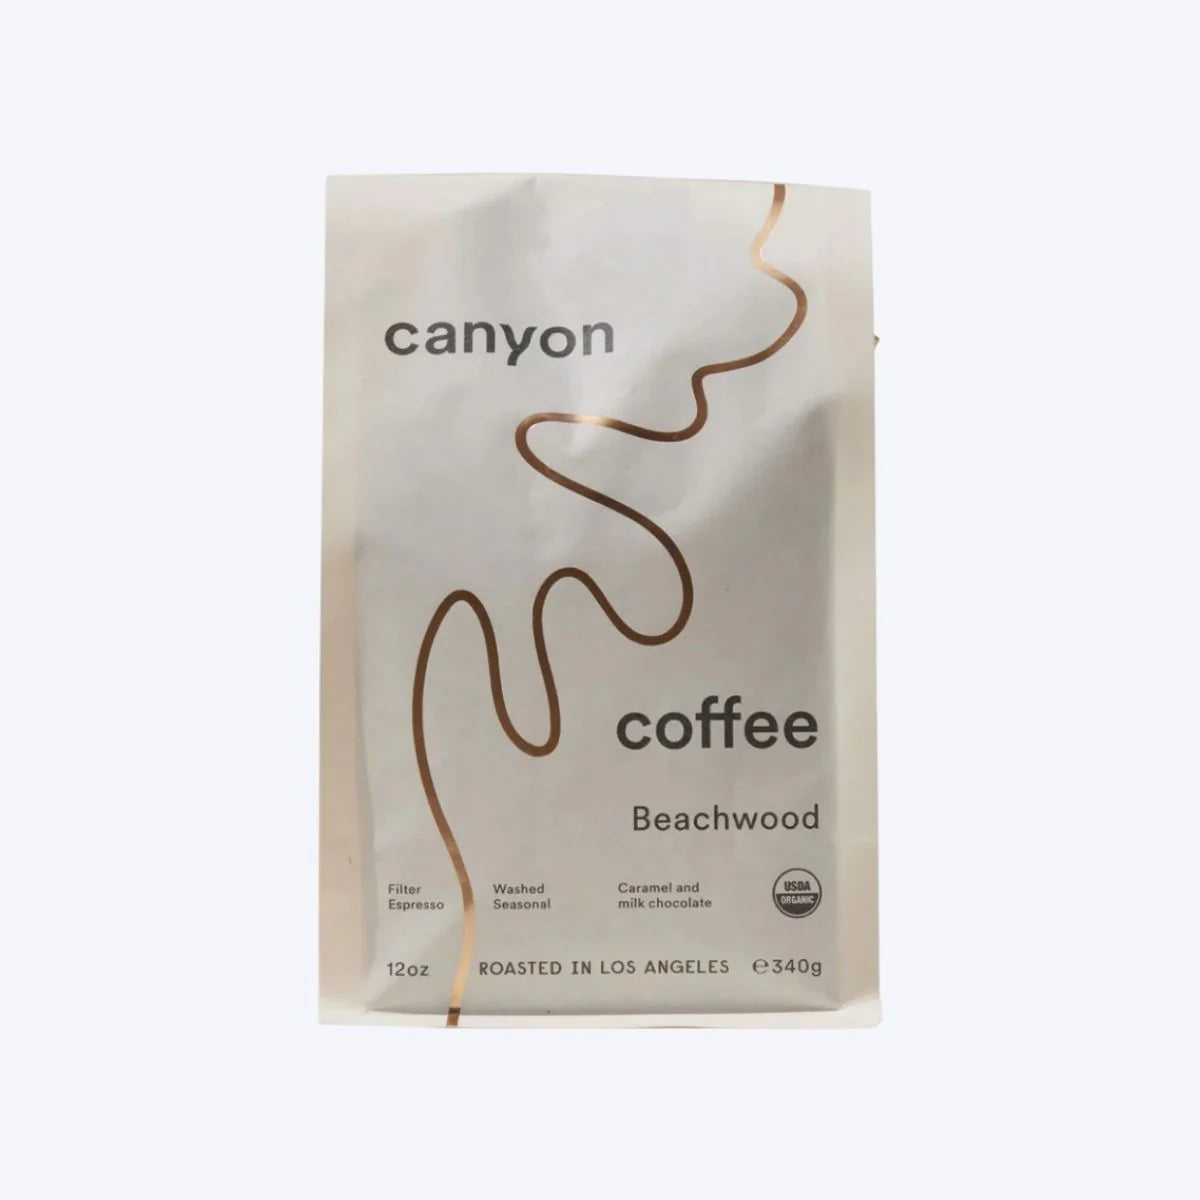 A bag of Beachwood blend coffee beans by Canyon Coffee.